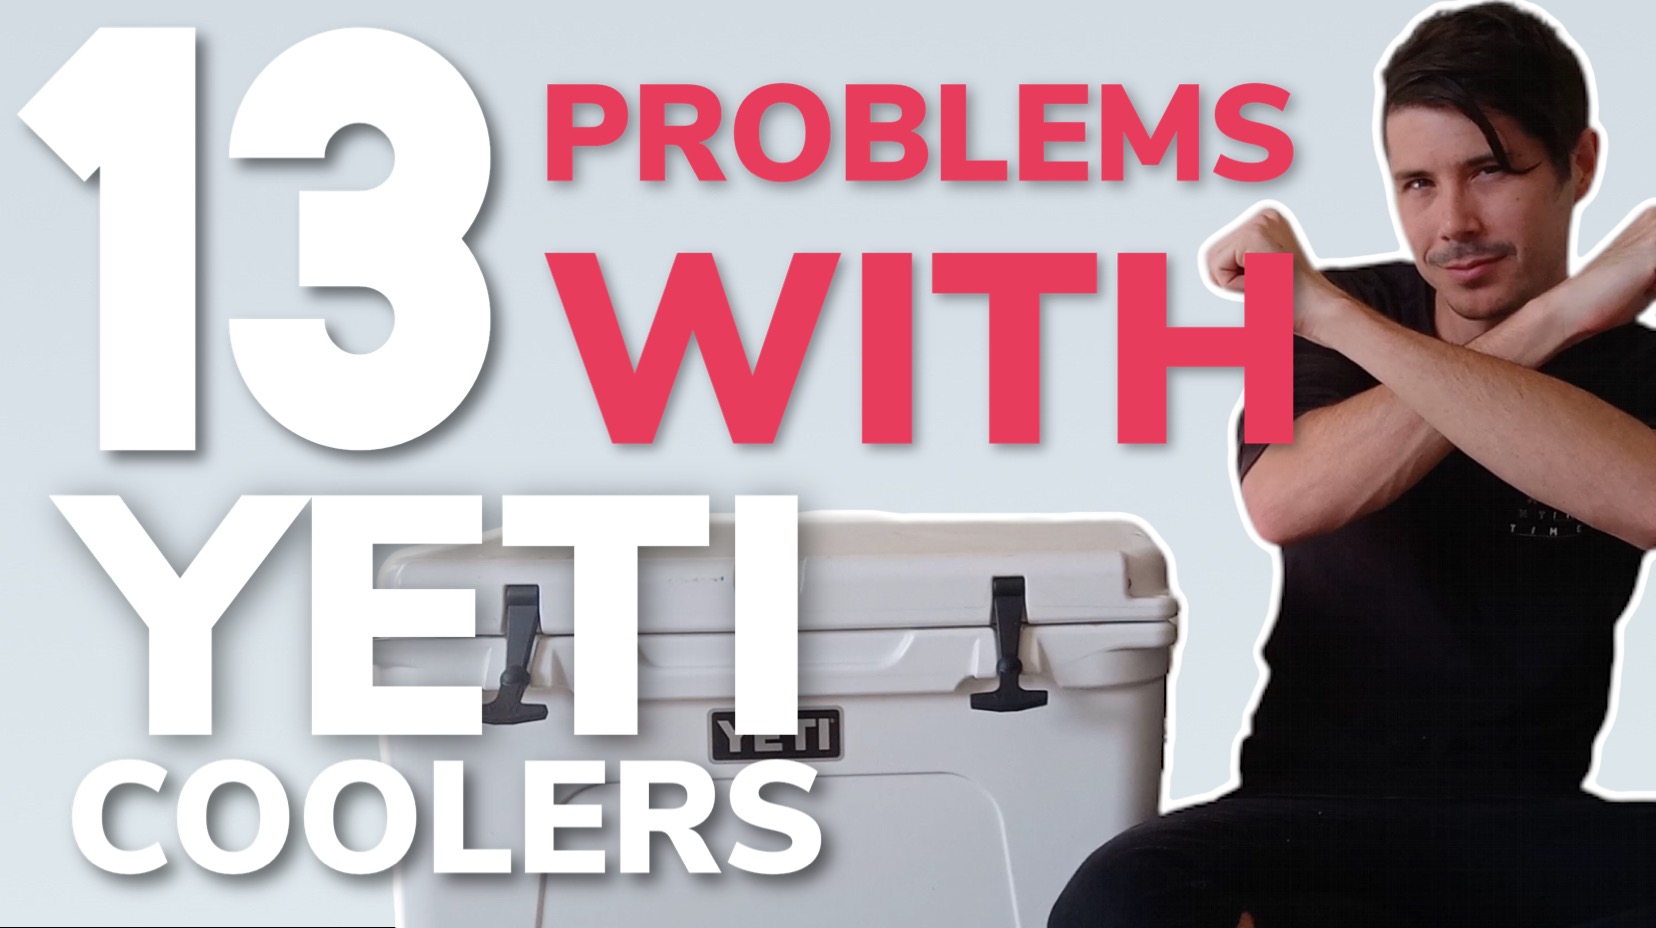 13 Problems With Yeti Coolers